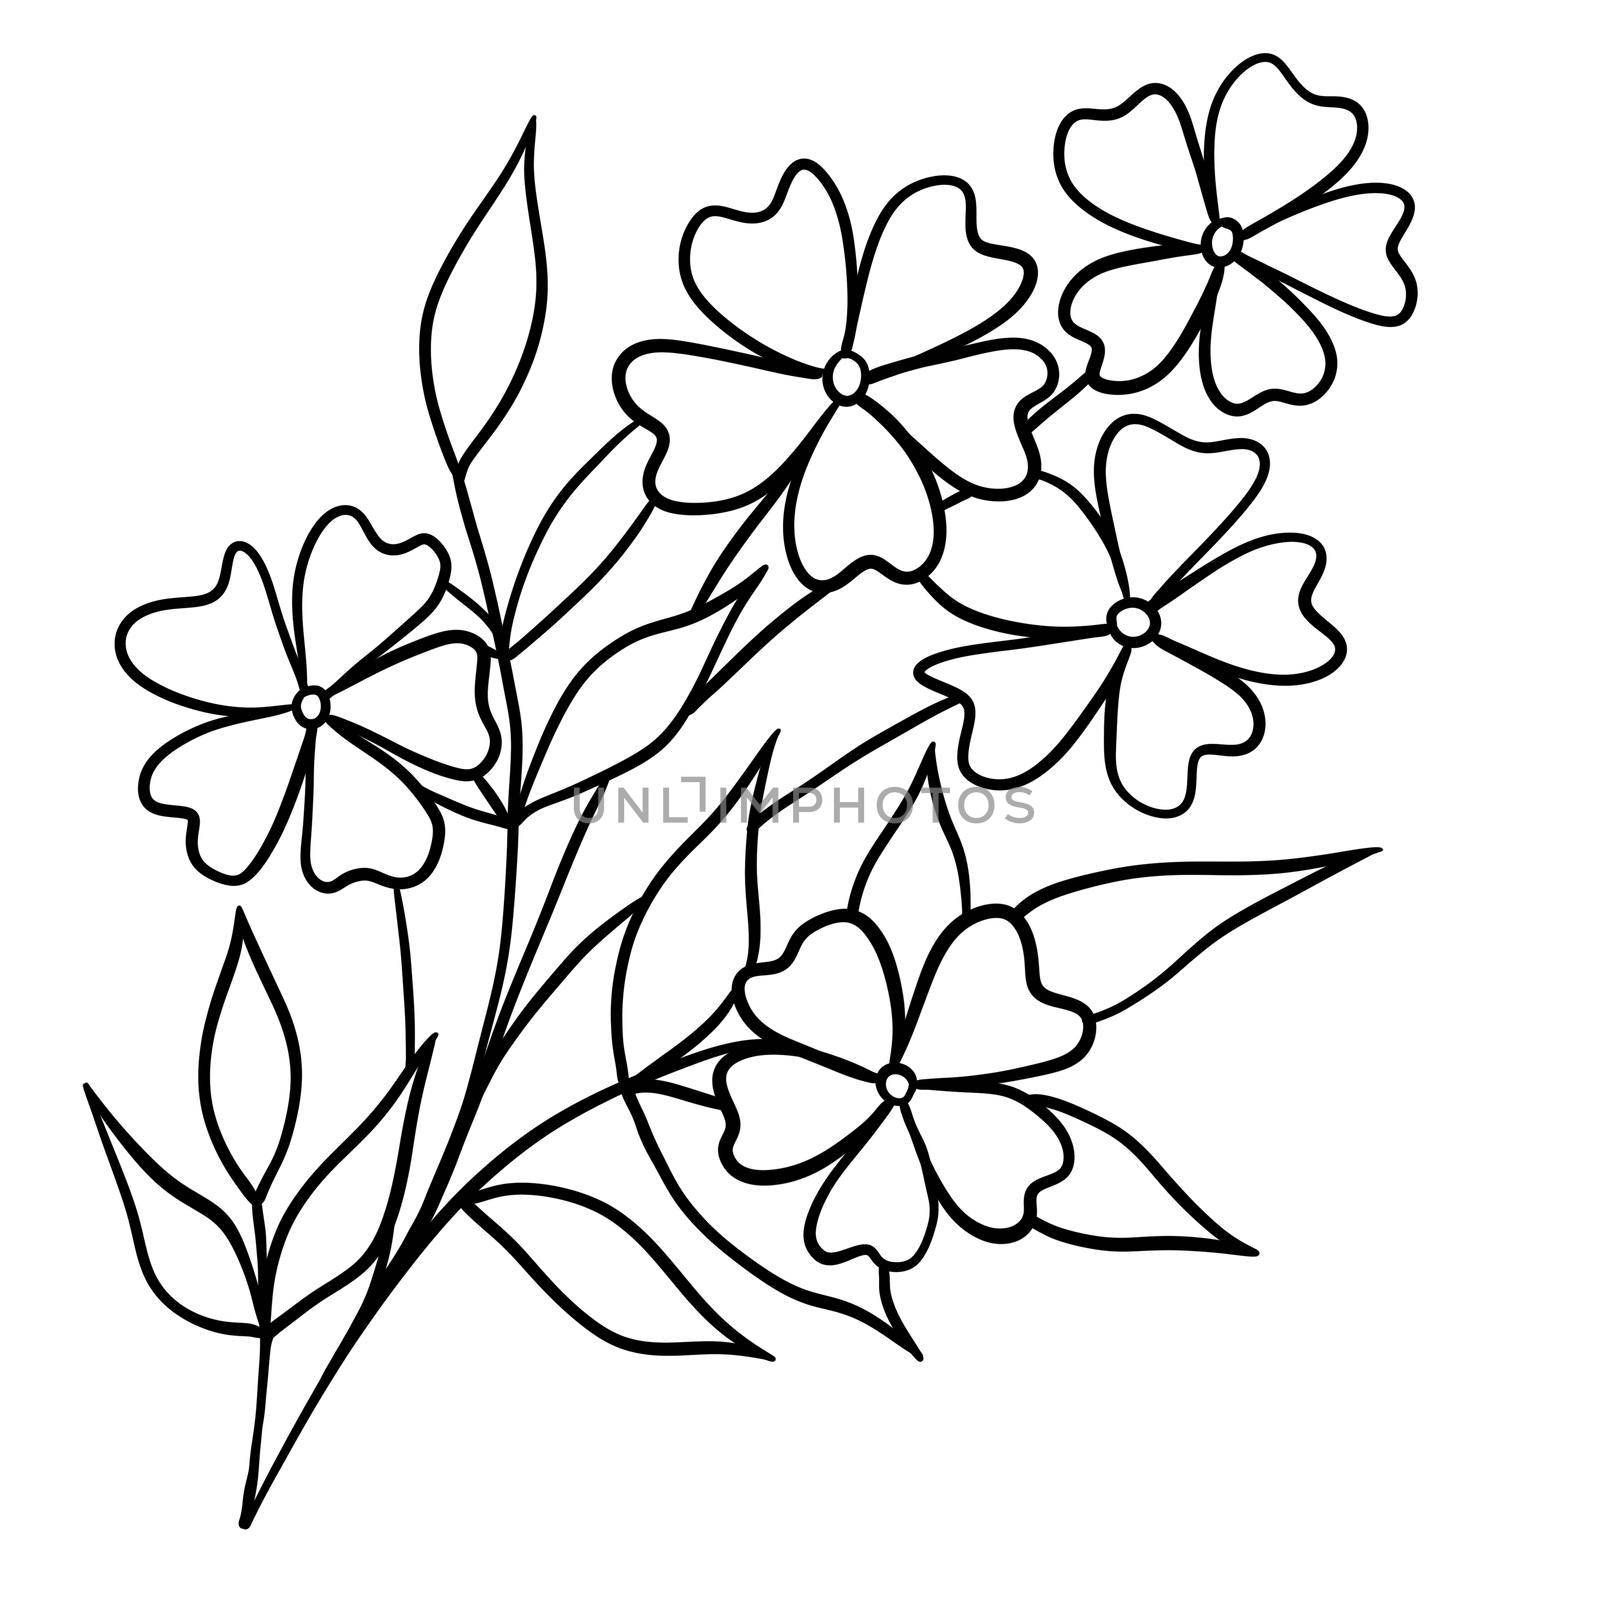 Hand drawn illustration of flowers leaves branch in black line outline. Minimalist floral garden design, bloom for cards invitations, elehant foliage plant nature concept